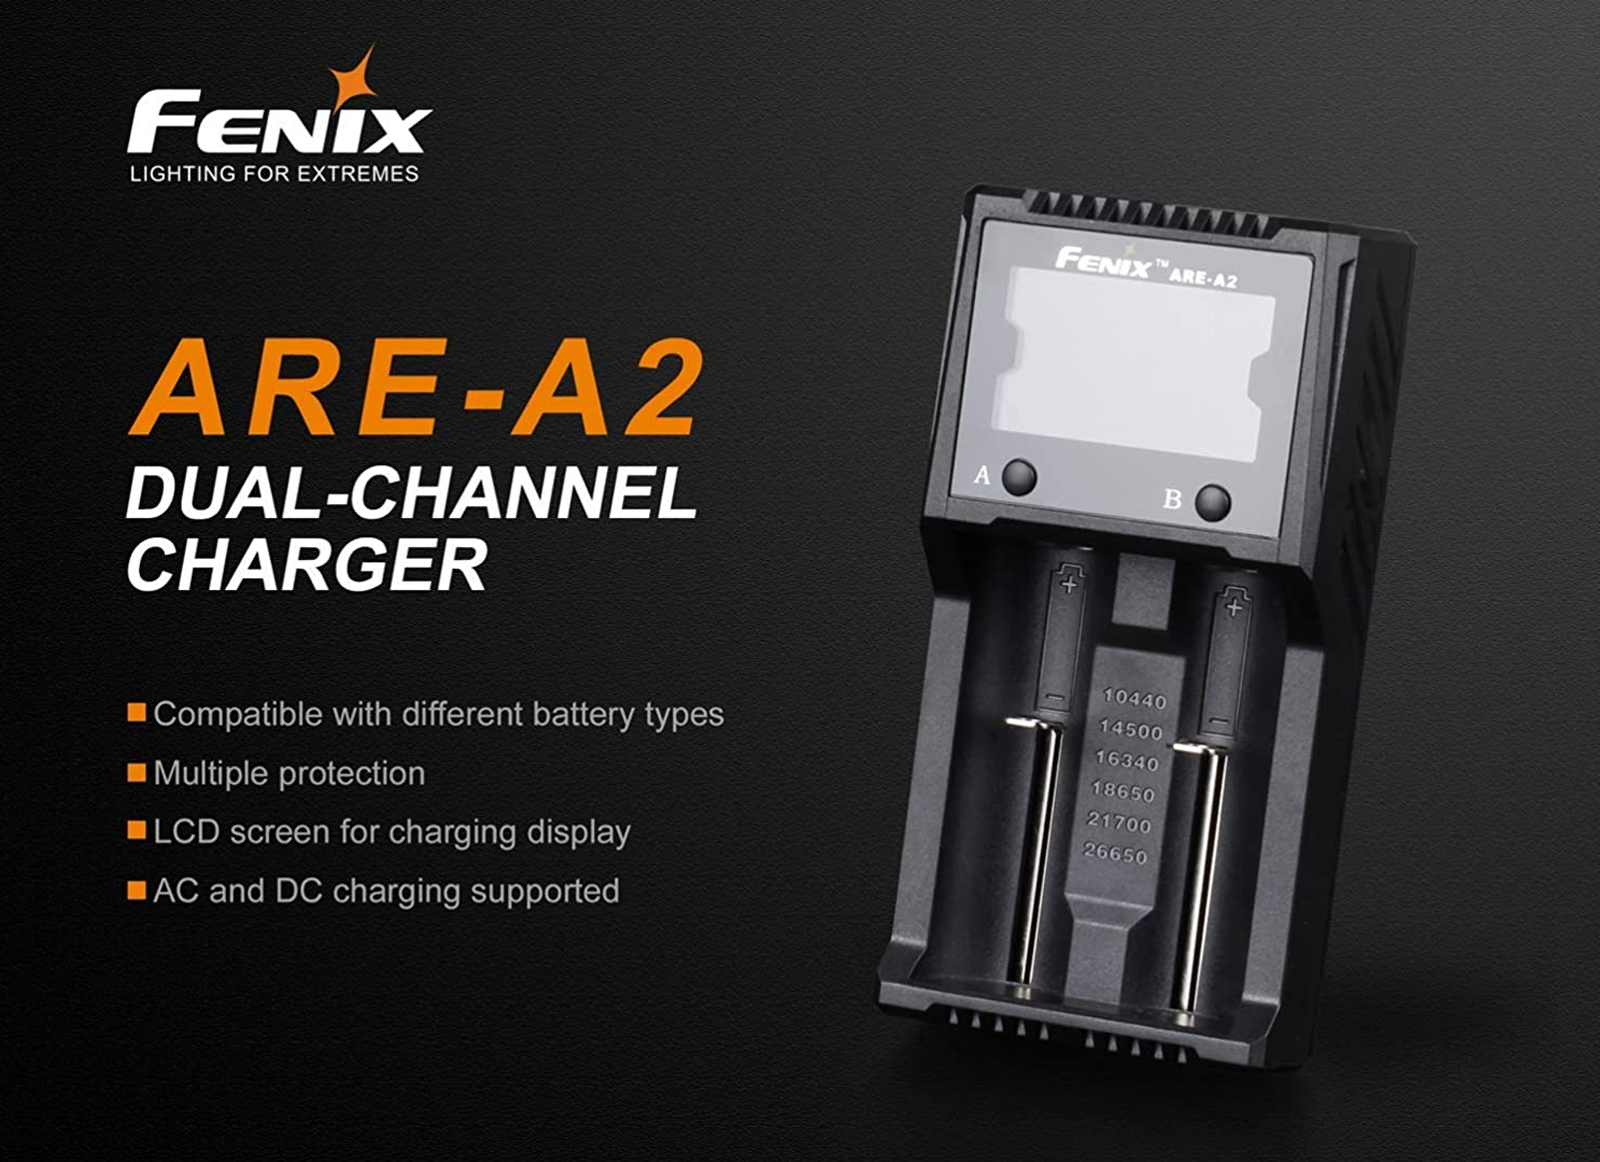 FENIX CARICABATTERIE DUAL CHANNEL FNX ARE-A2